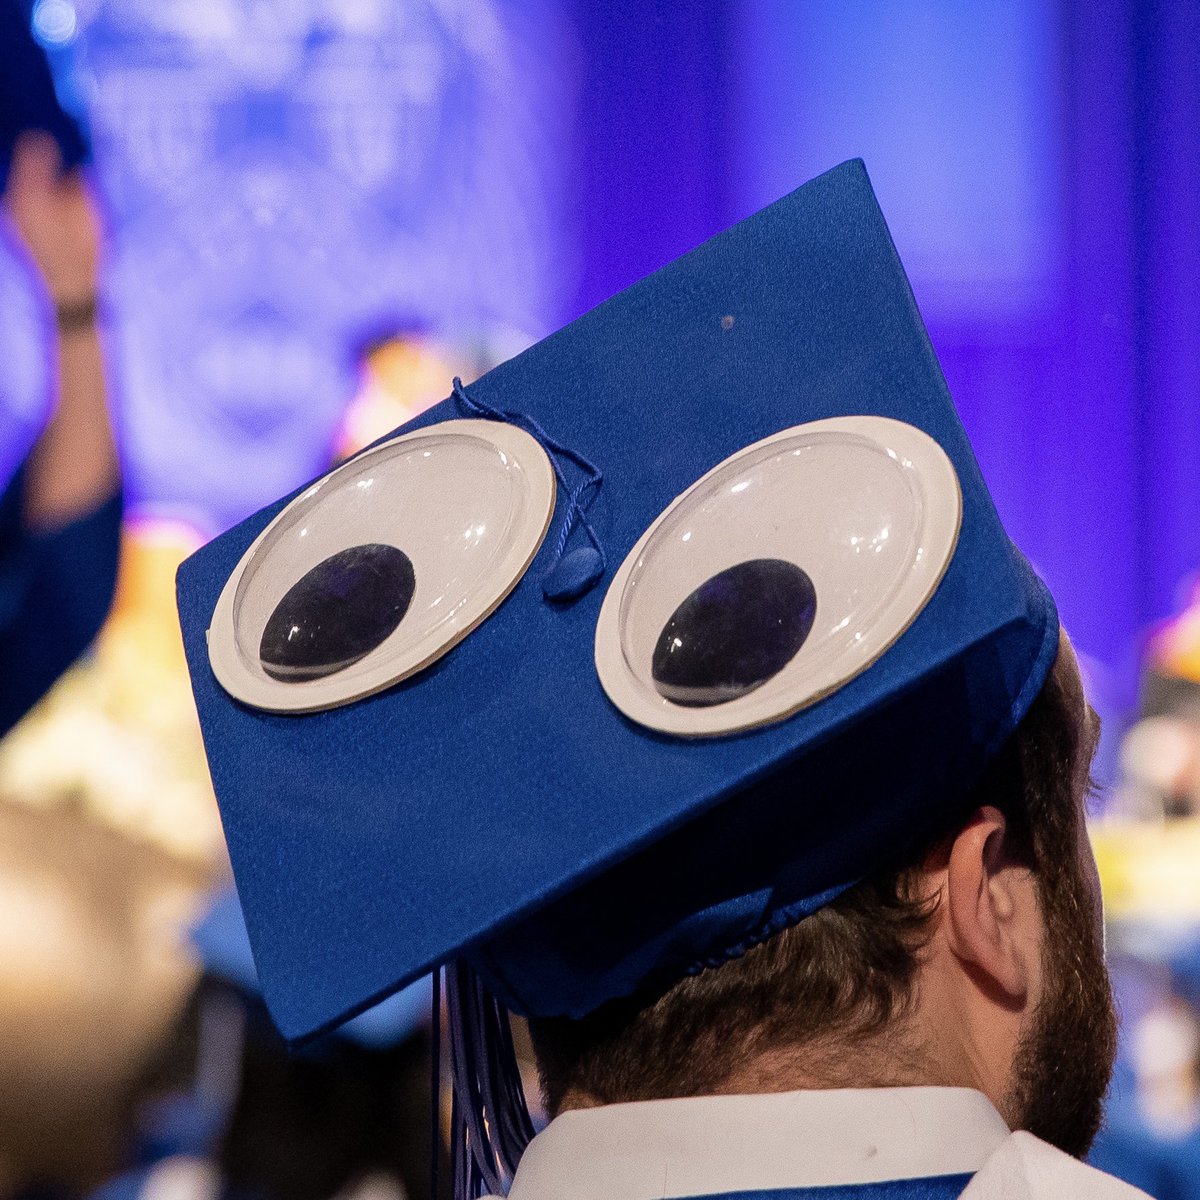 Stand out on graduation day, #UBClassOf2024! 🎓🎨 Make your grad cap something special, and you could win a diploma frame, #UBuffalo prize packs, and #UBTrueBlue bragging rights! Submit your entry by 5/13 at 1 p.m. buffalo.edu/content/www/st…